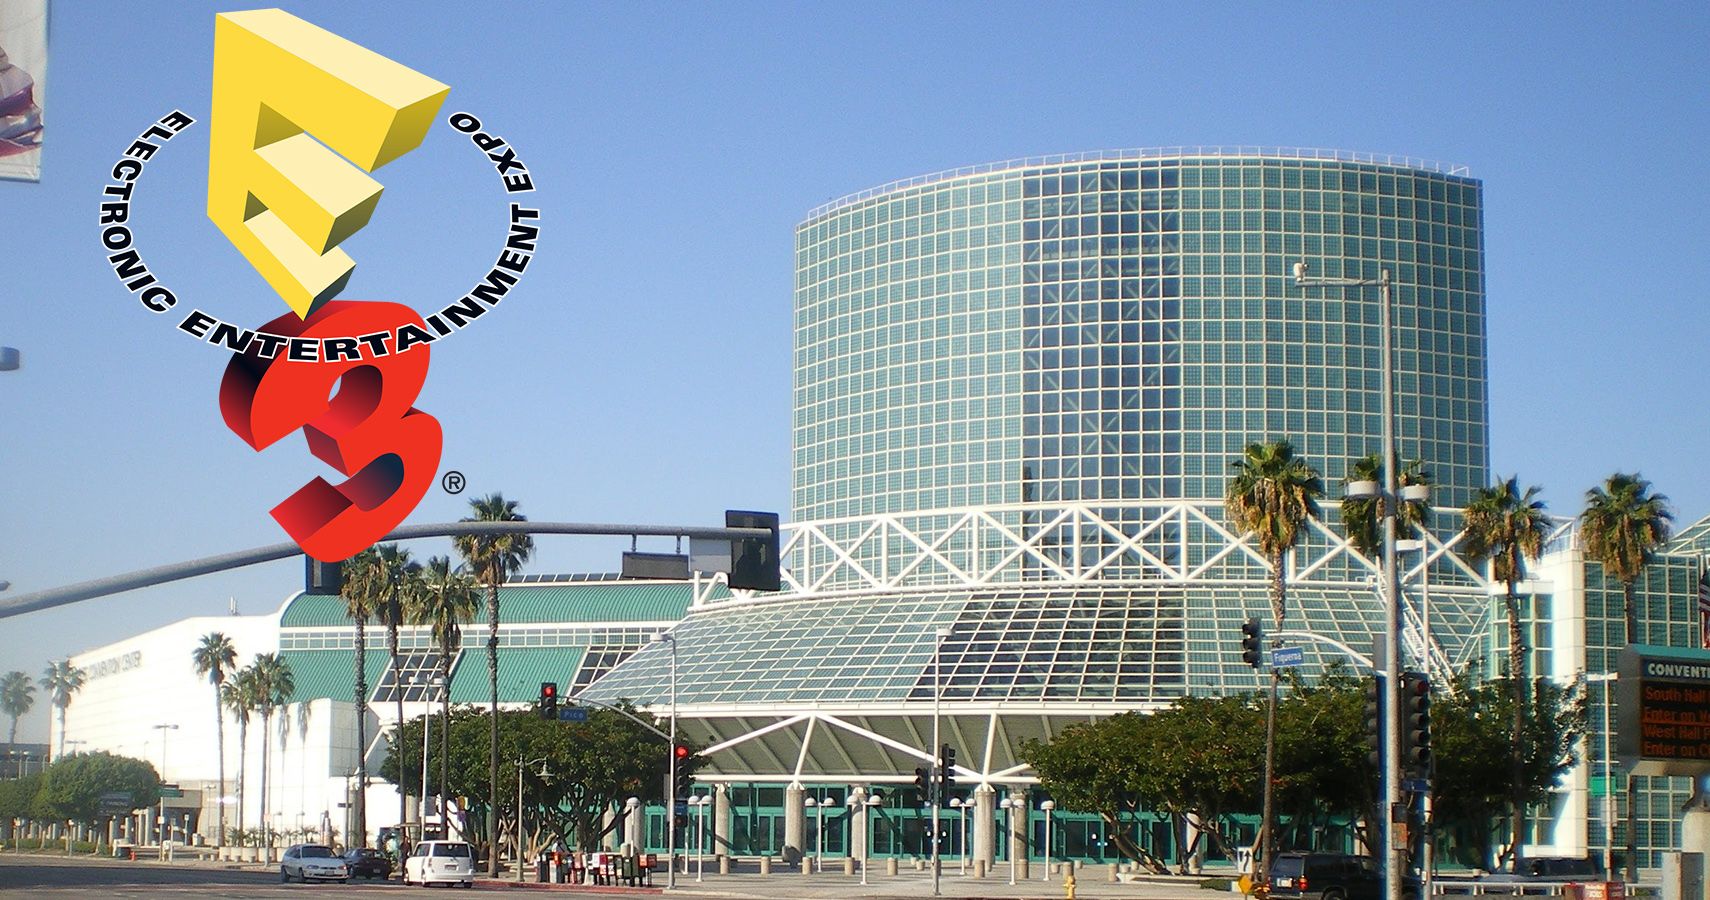 E3 May Change Venue After 2019 Due To Convention Center Dispute